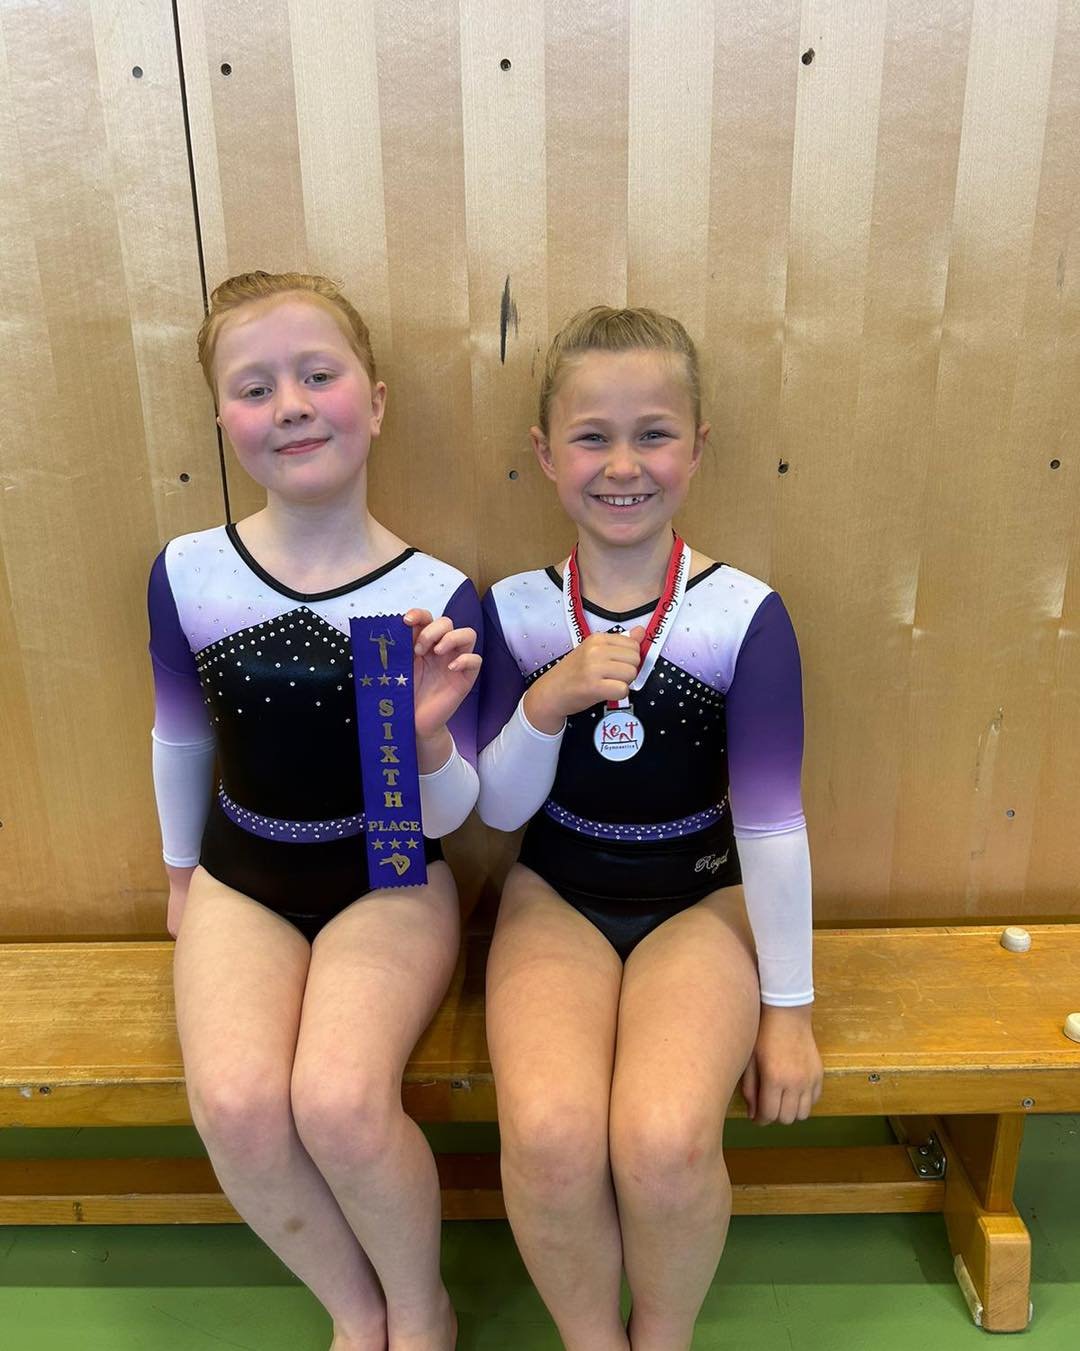 FABULOUS results in round 2! 🤩

Isla - SILVER MEDAL 🥈
Millie - 6th place 

Fantastic girlies! Well done 🥰